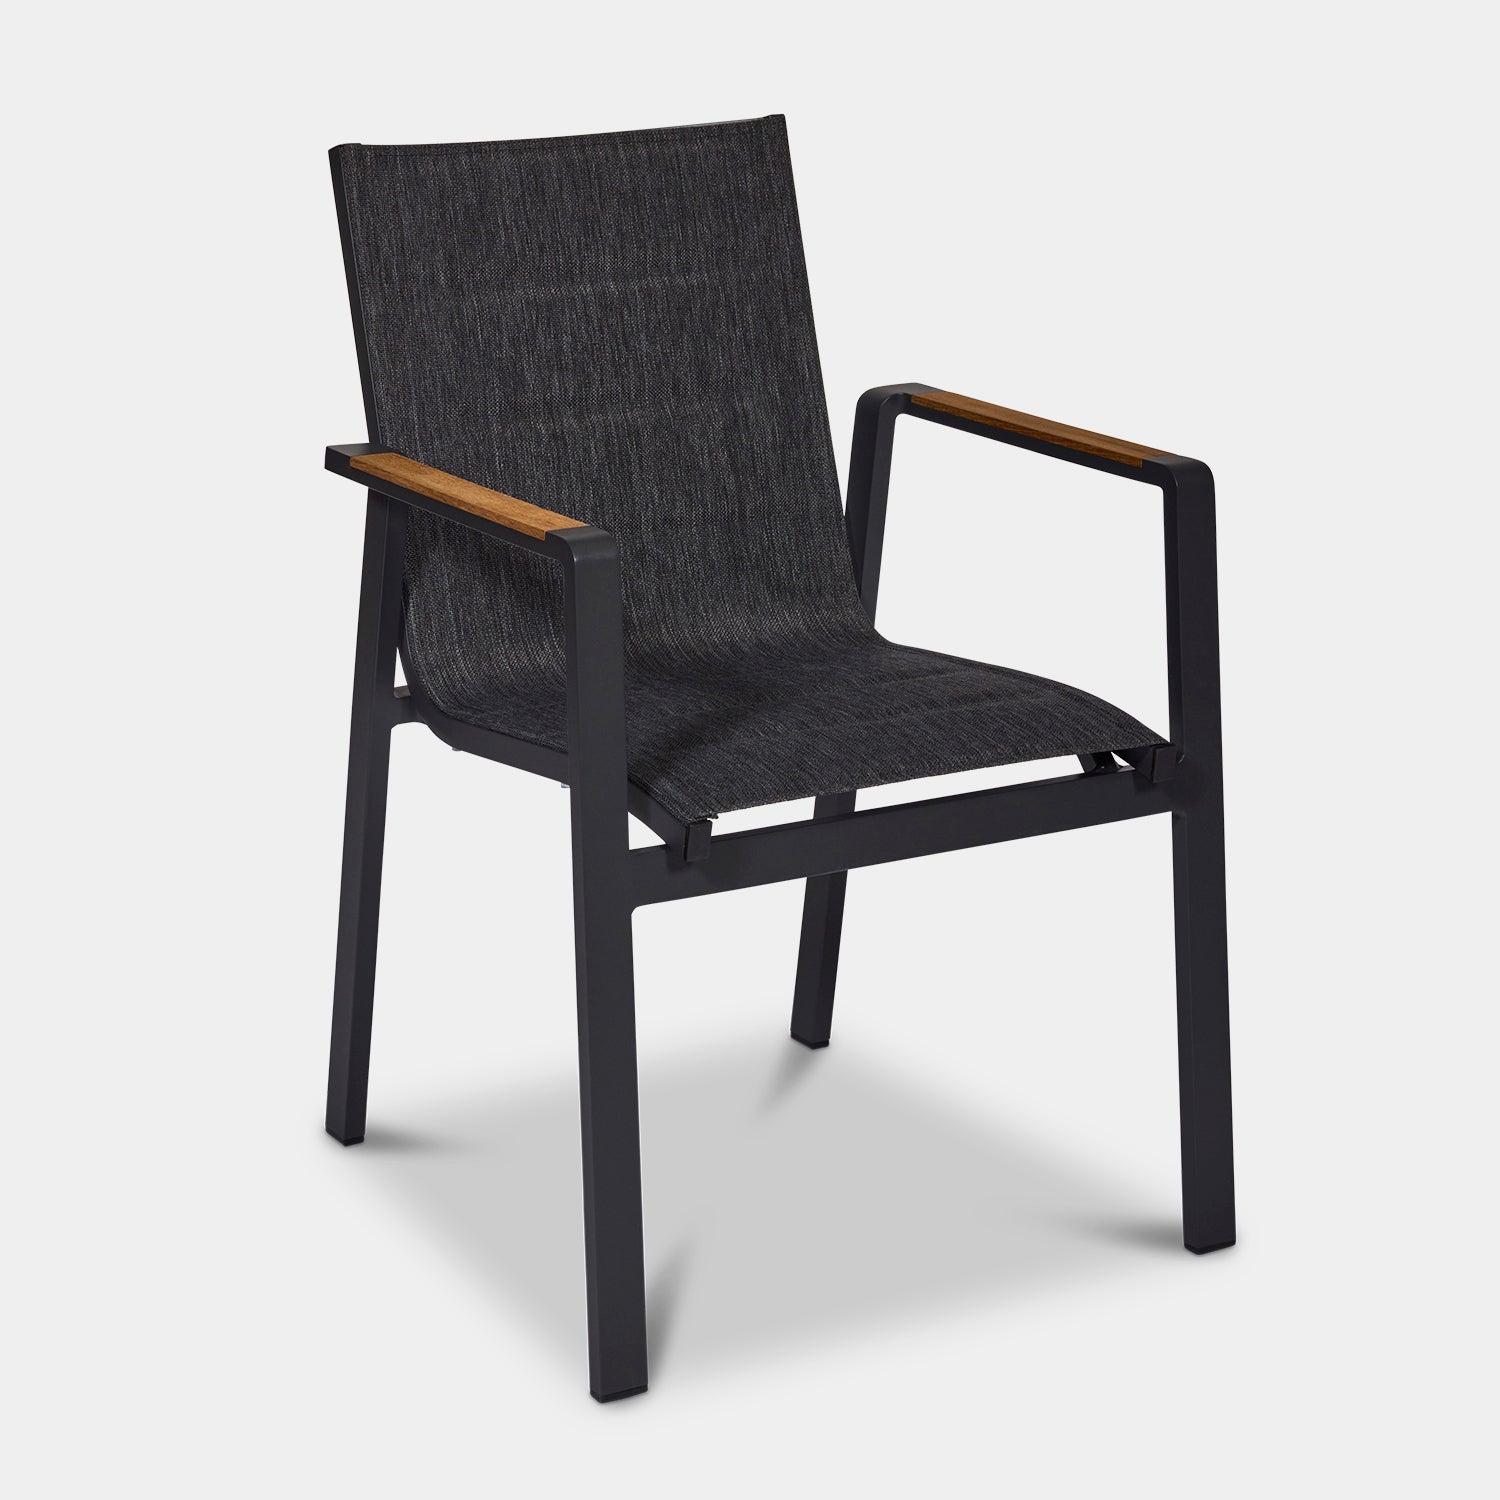 Noosa dining chair in charcoal with teak arm